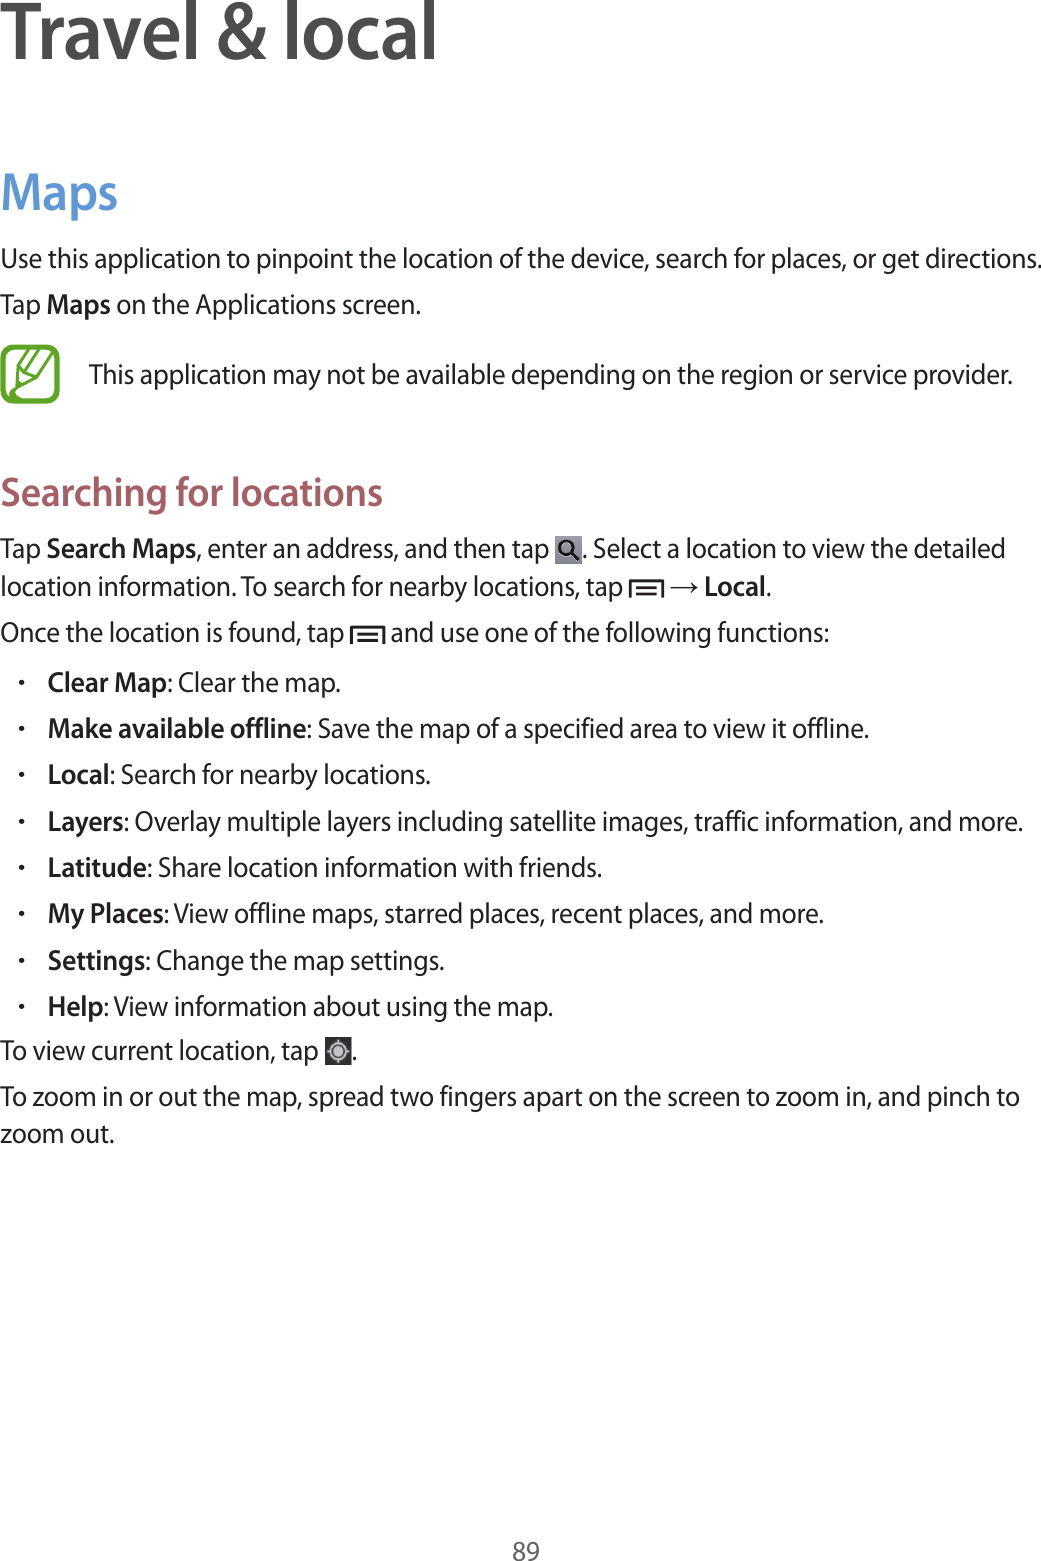 89Travel &amp; localMapsUse this application to pinpoint the location of the device, search for places, or get directions.Tap Maps on the Applications screen.This application may not be available depending on the region or service provider.Searching for locationsTap Search Maps, enter an address, and then tap  . Select a location to view the detailed location information. To search for nearby locations, tap   → Local.Once the location is found, tap   and use one of the following functions:•Clear Map: Clear the map.•Make available offline: Save the map of a specified area to view it offline.•Local: Search for nearby locations.•Layers: Overlay multiple layers including satellite images, traffic information, and more.•Latitude: Share location information with friends.•My Places: View offline maps, starred places, recent places, and more.•Settings: Change the map settings.•Help: View information about using the map.To view current location, tap  .To zoom in or out the map, spread two fingers apart on the screen to zoom in, and pinch to zoom out.